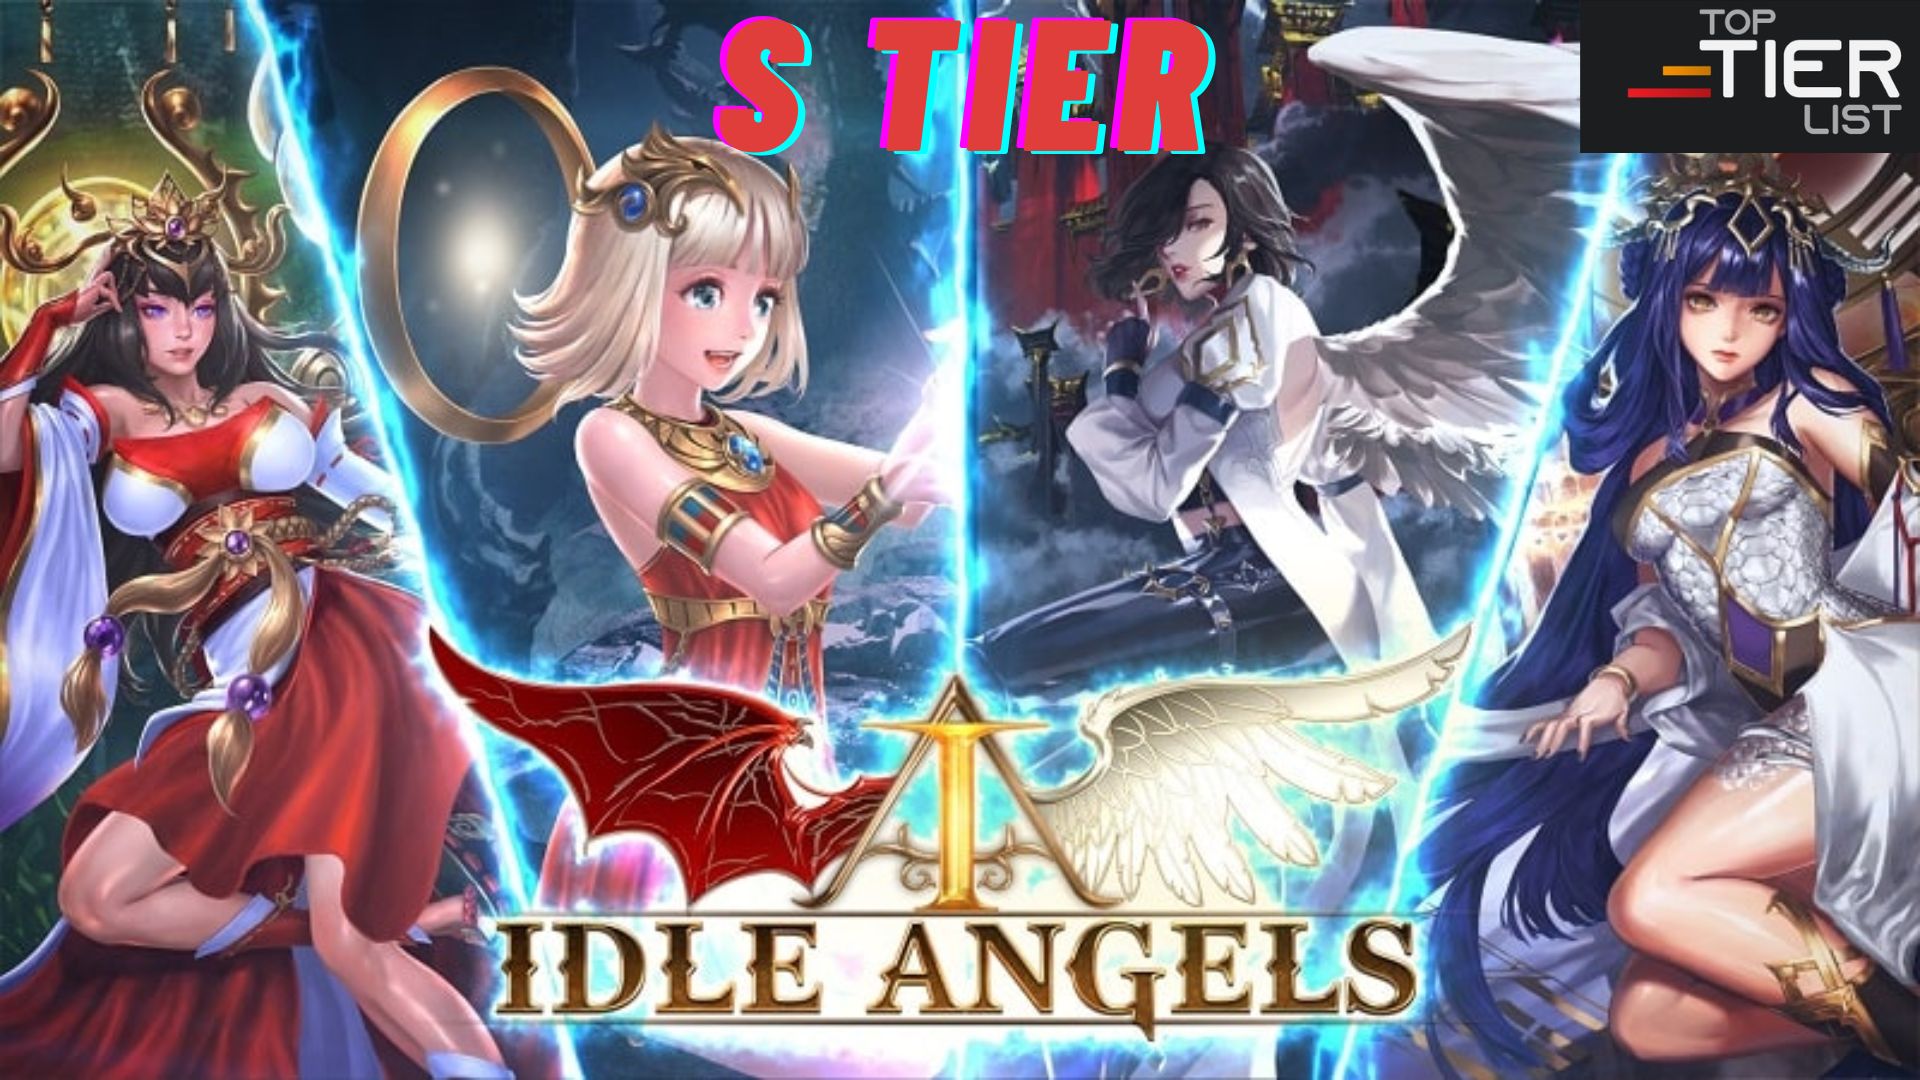 S Tier of idle angels